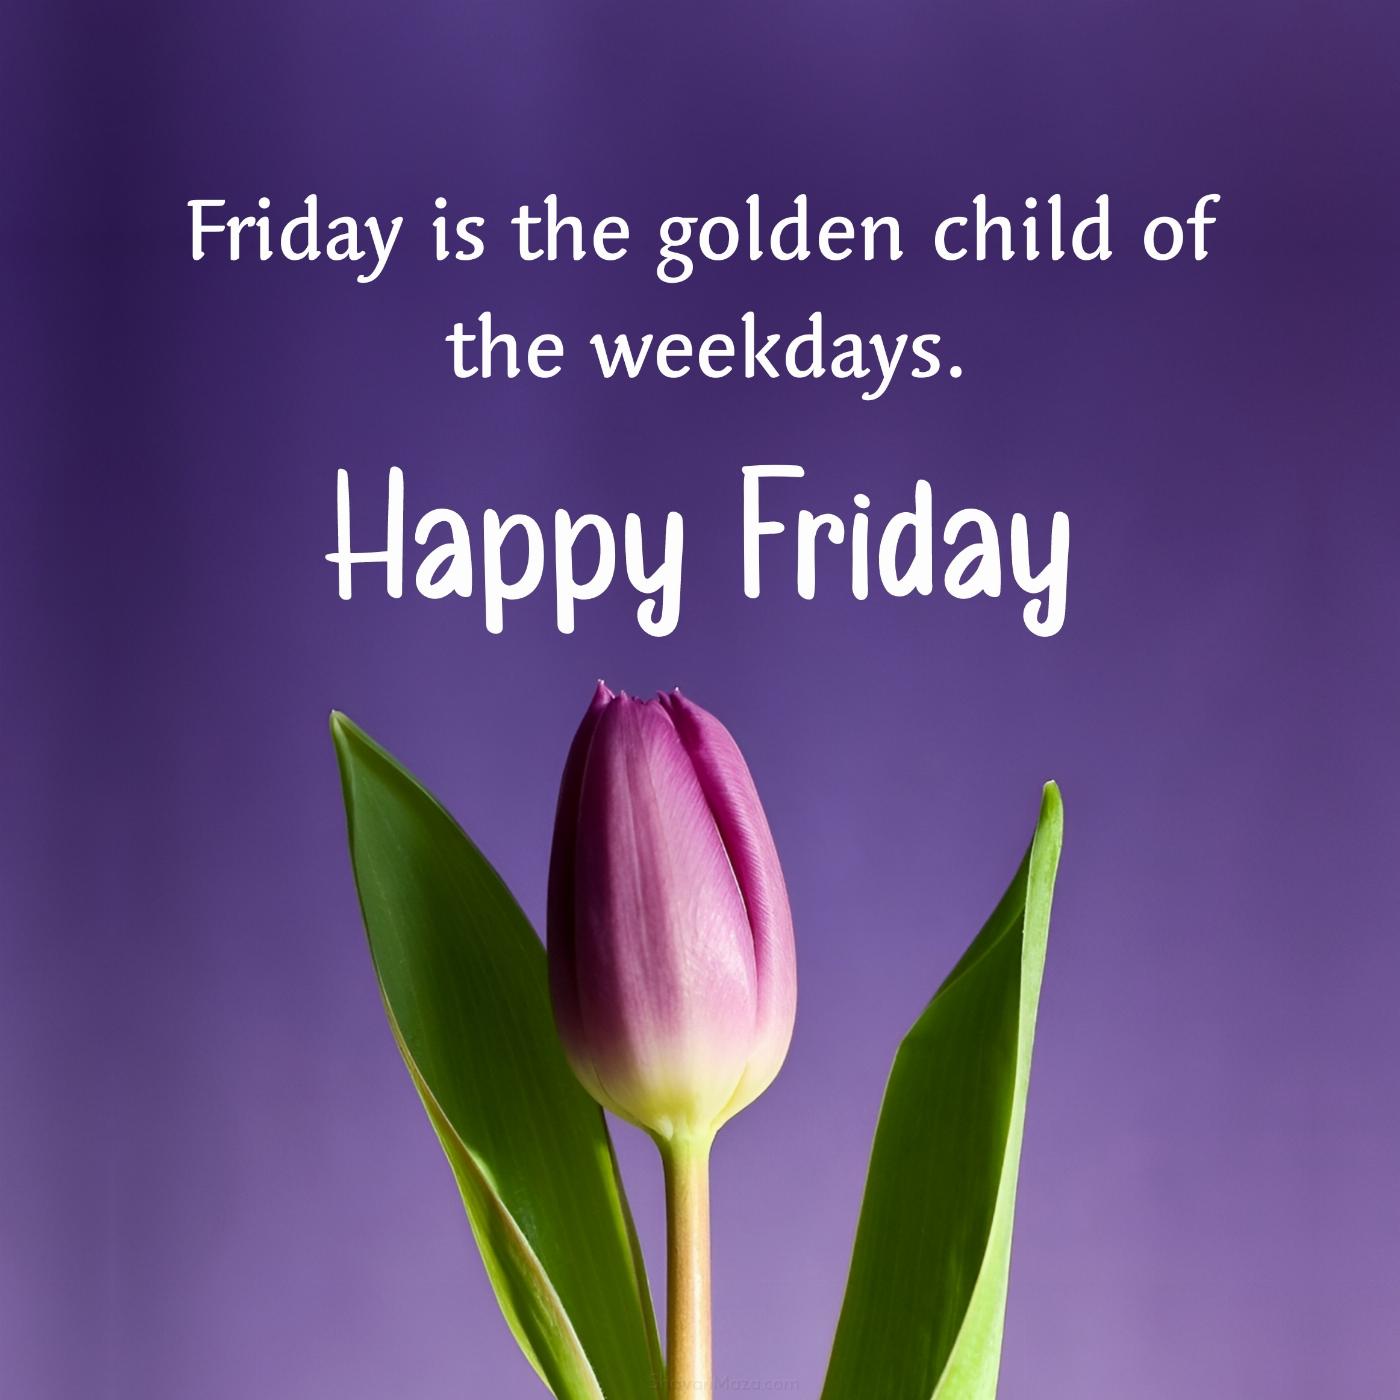 Friday is the golden child of the weekdays